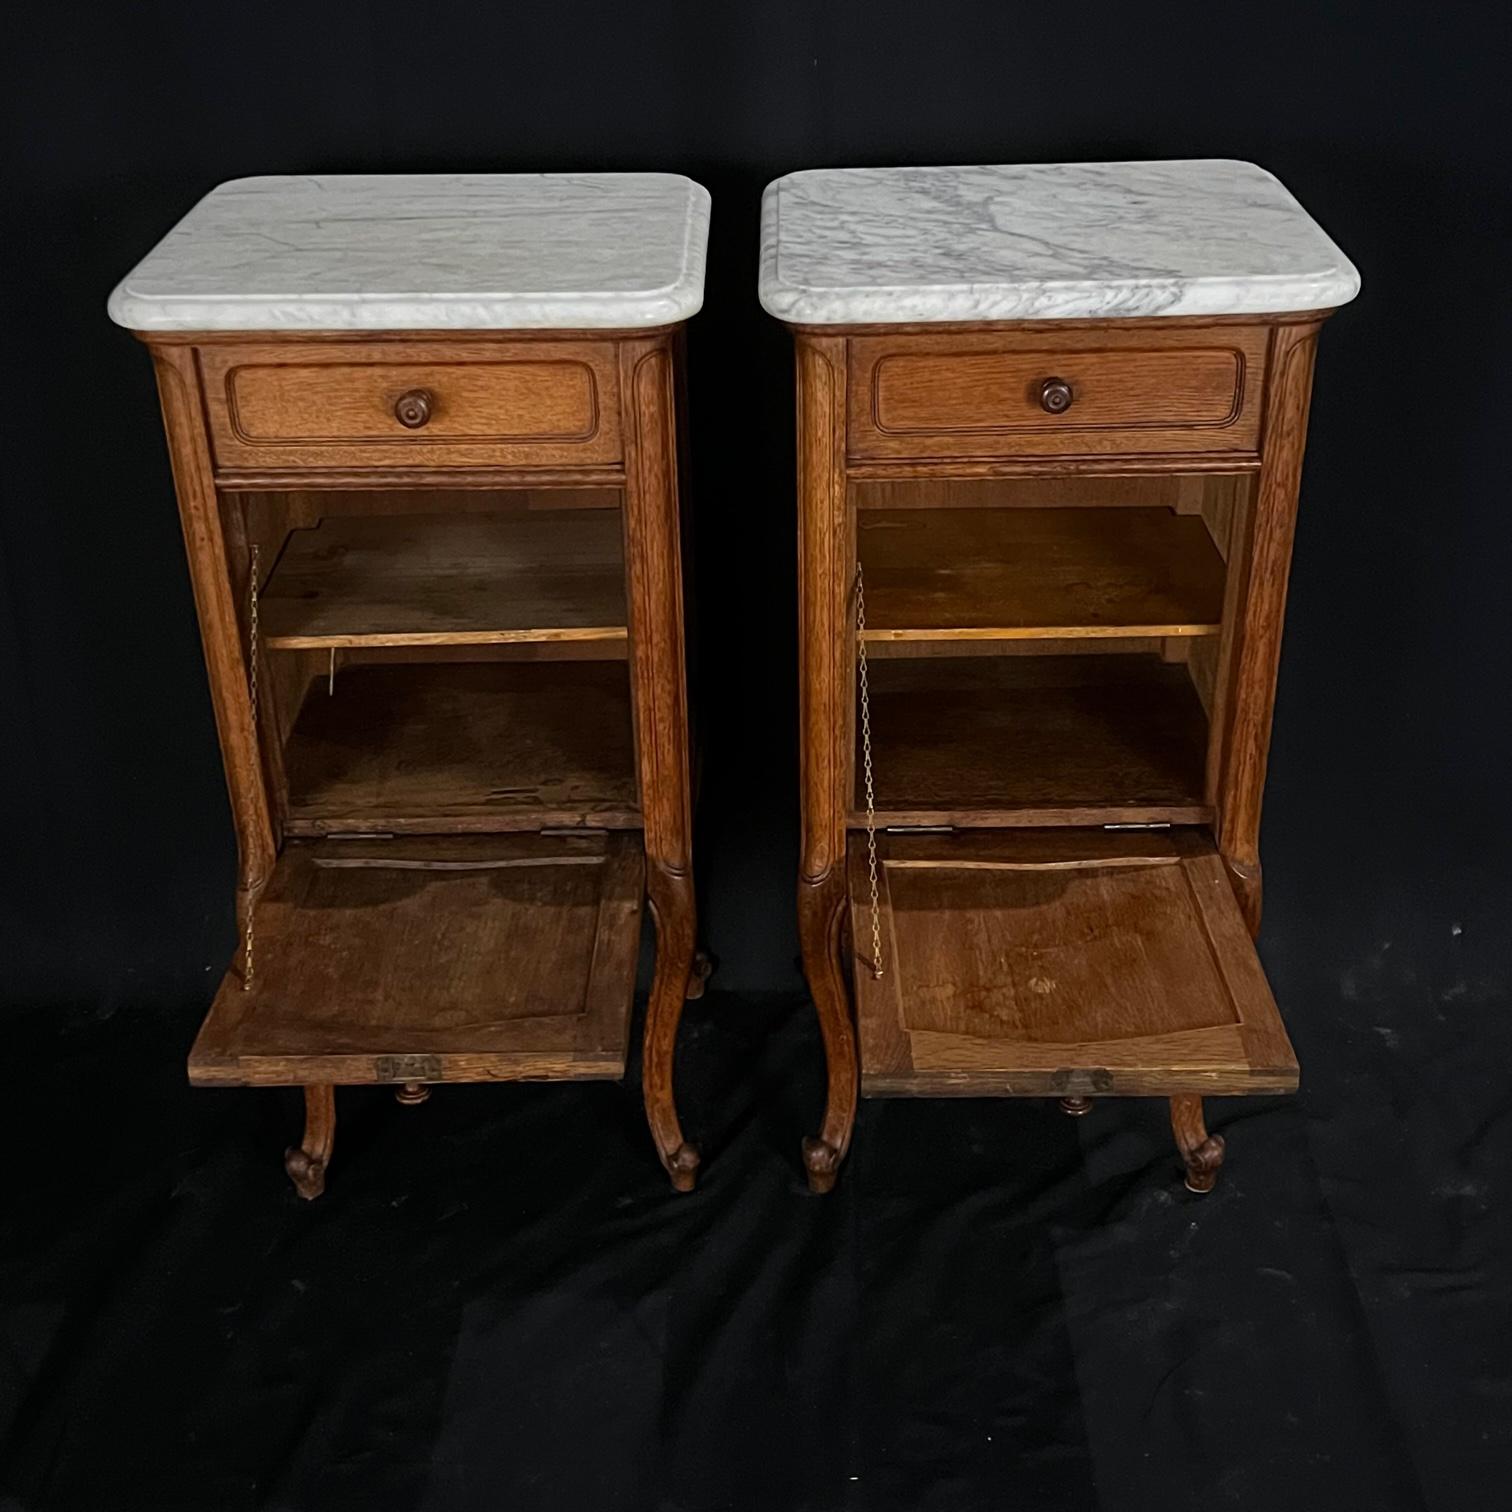 Lovely antique pair of oak French night stands, bedside tables or side tables. Made of oak featuring one drawer over a cabinet with two shelves, one removable. Lovely cartouche carvings and cabriole legs lead to scrolled feet. Versatile and useful